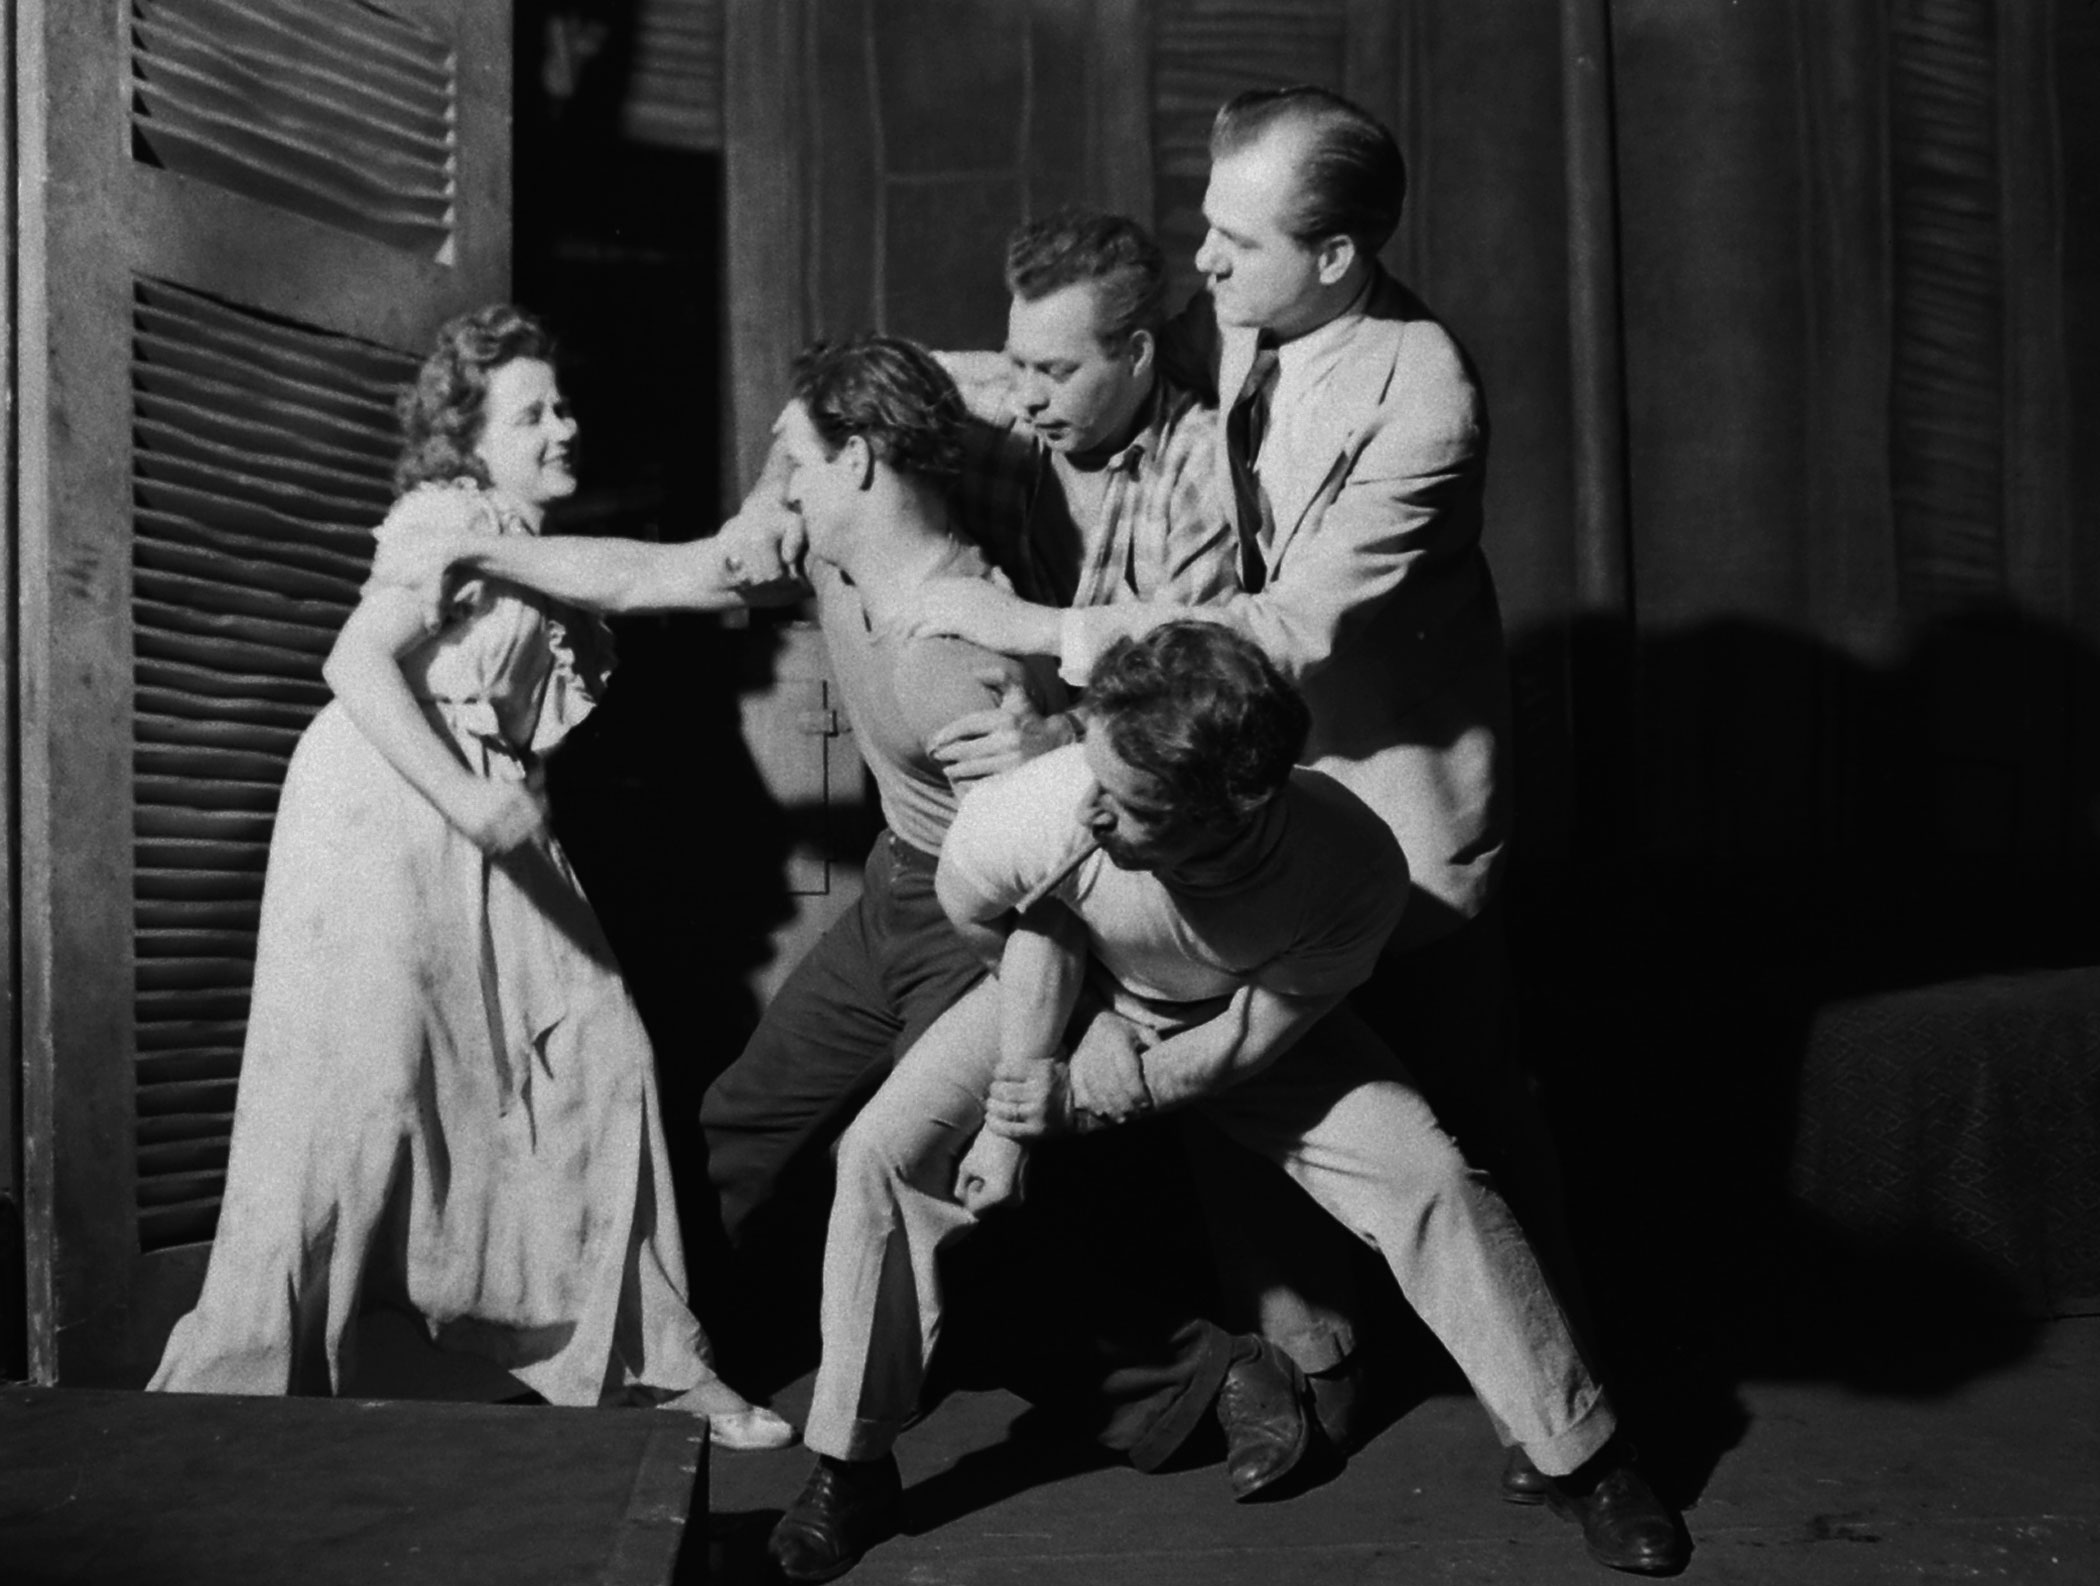 Kim Hunter (left), Marlon Brando, Karl Malden and others in rehearsal for the original production of A Streetcar Named Desire.